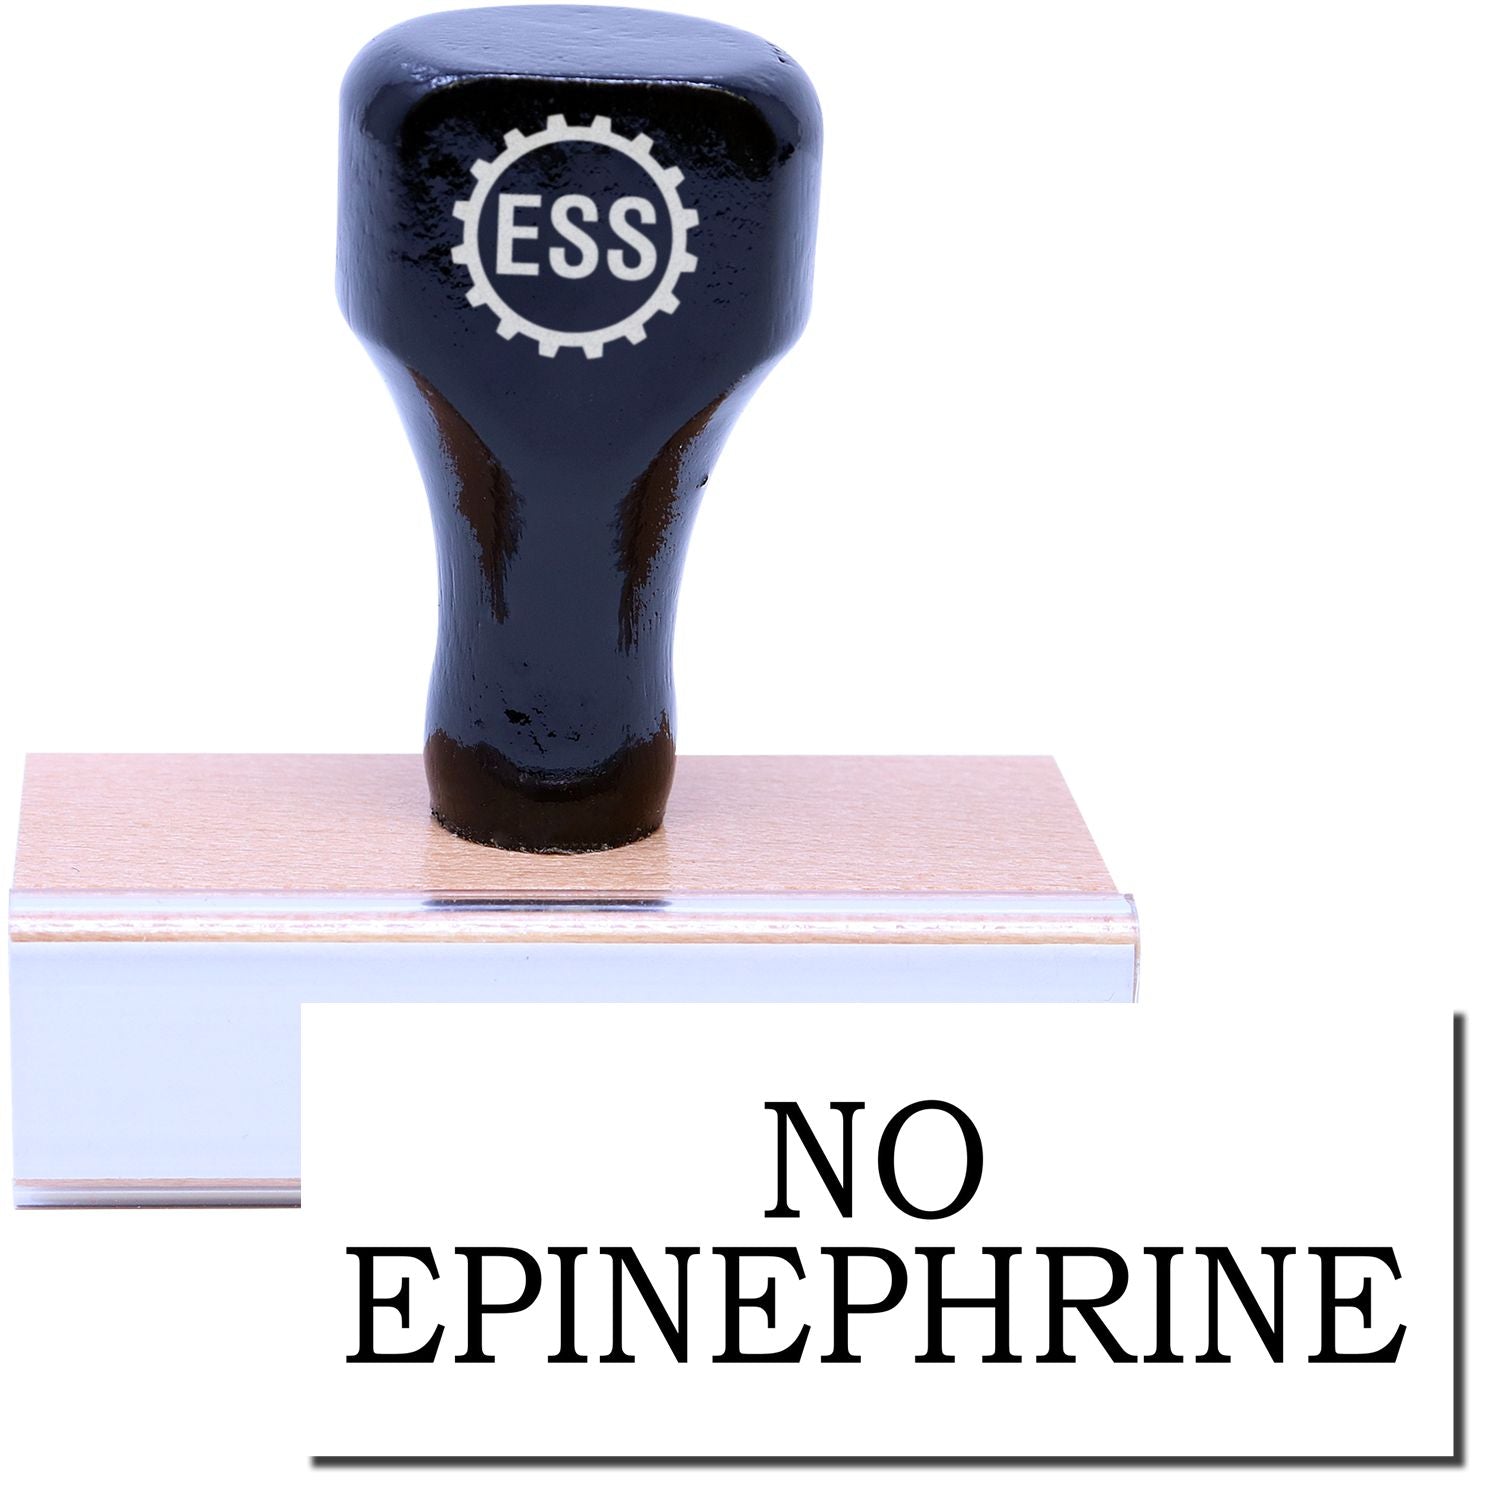 A stock office medical rubber stamp with a stamped image showing how the text "NO EPINEPHRINE" is displayed after stamping.